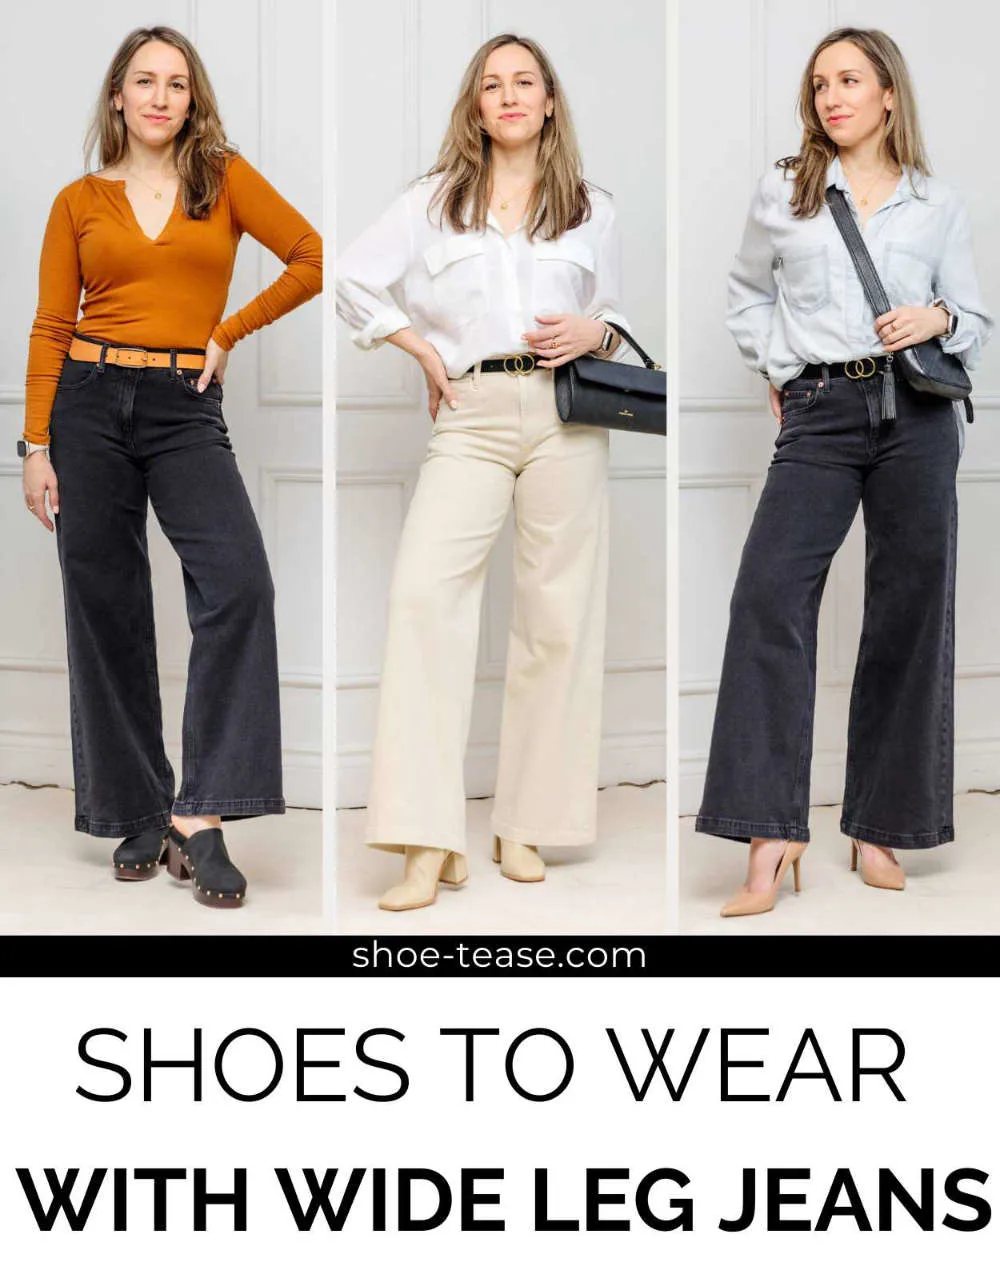 Collage of women wearing different shoes with wide leg jeans outfits.